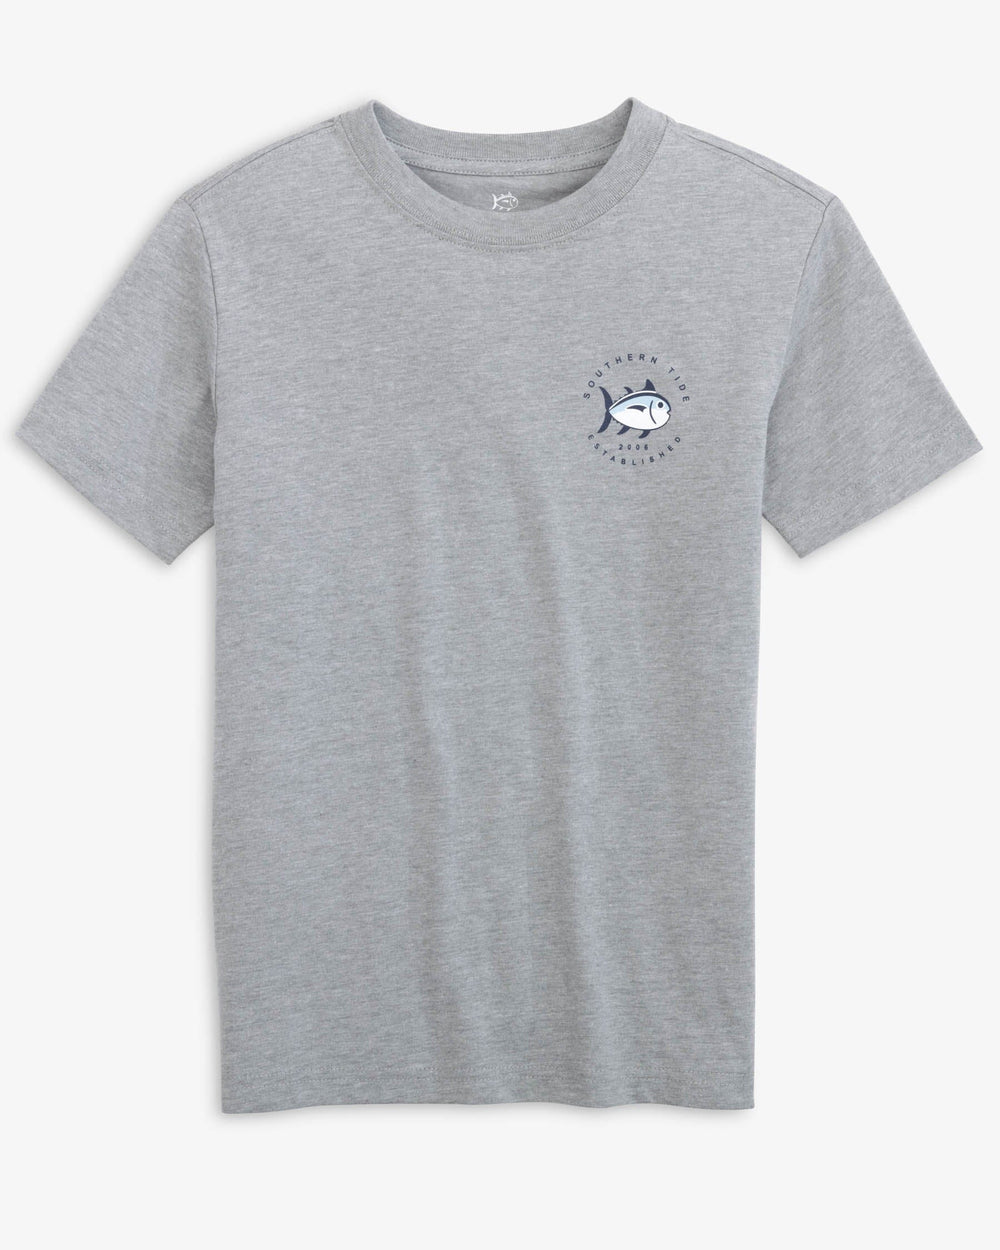 The front view of the Southern Tide Kid's Coastal Expedition Heather T-shirt by Southern Tide - Heather Quarry